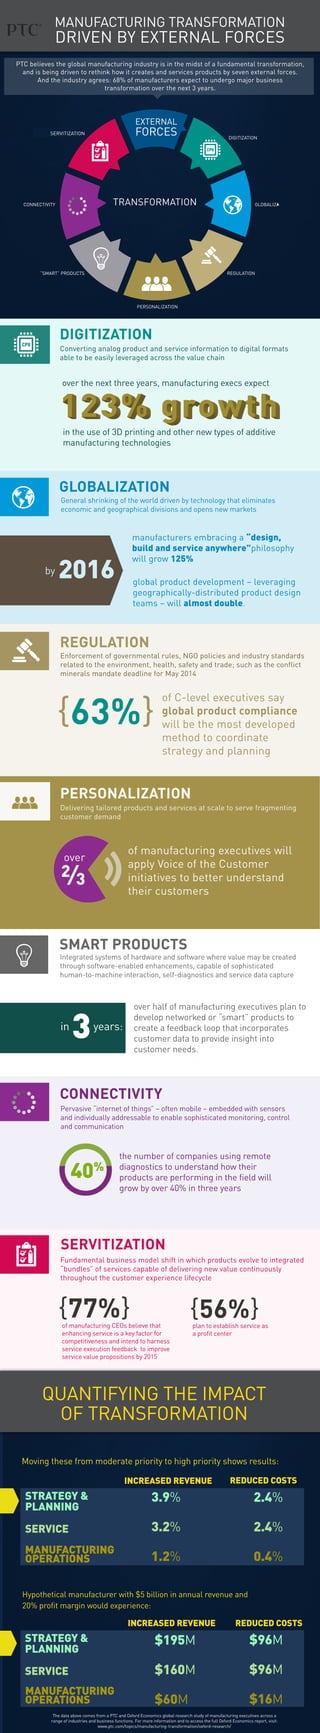 Manufacturing Transformation Driven by External Forces [Infographic]